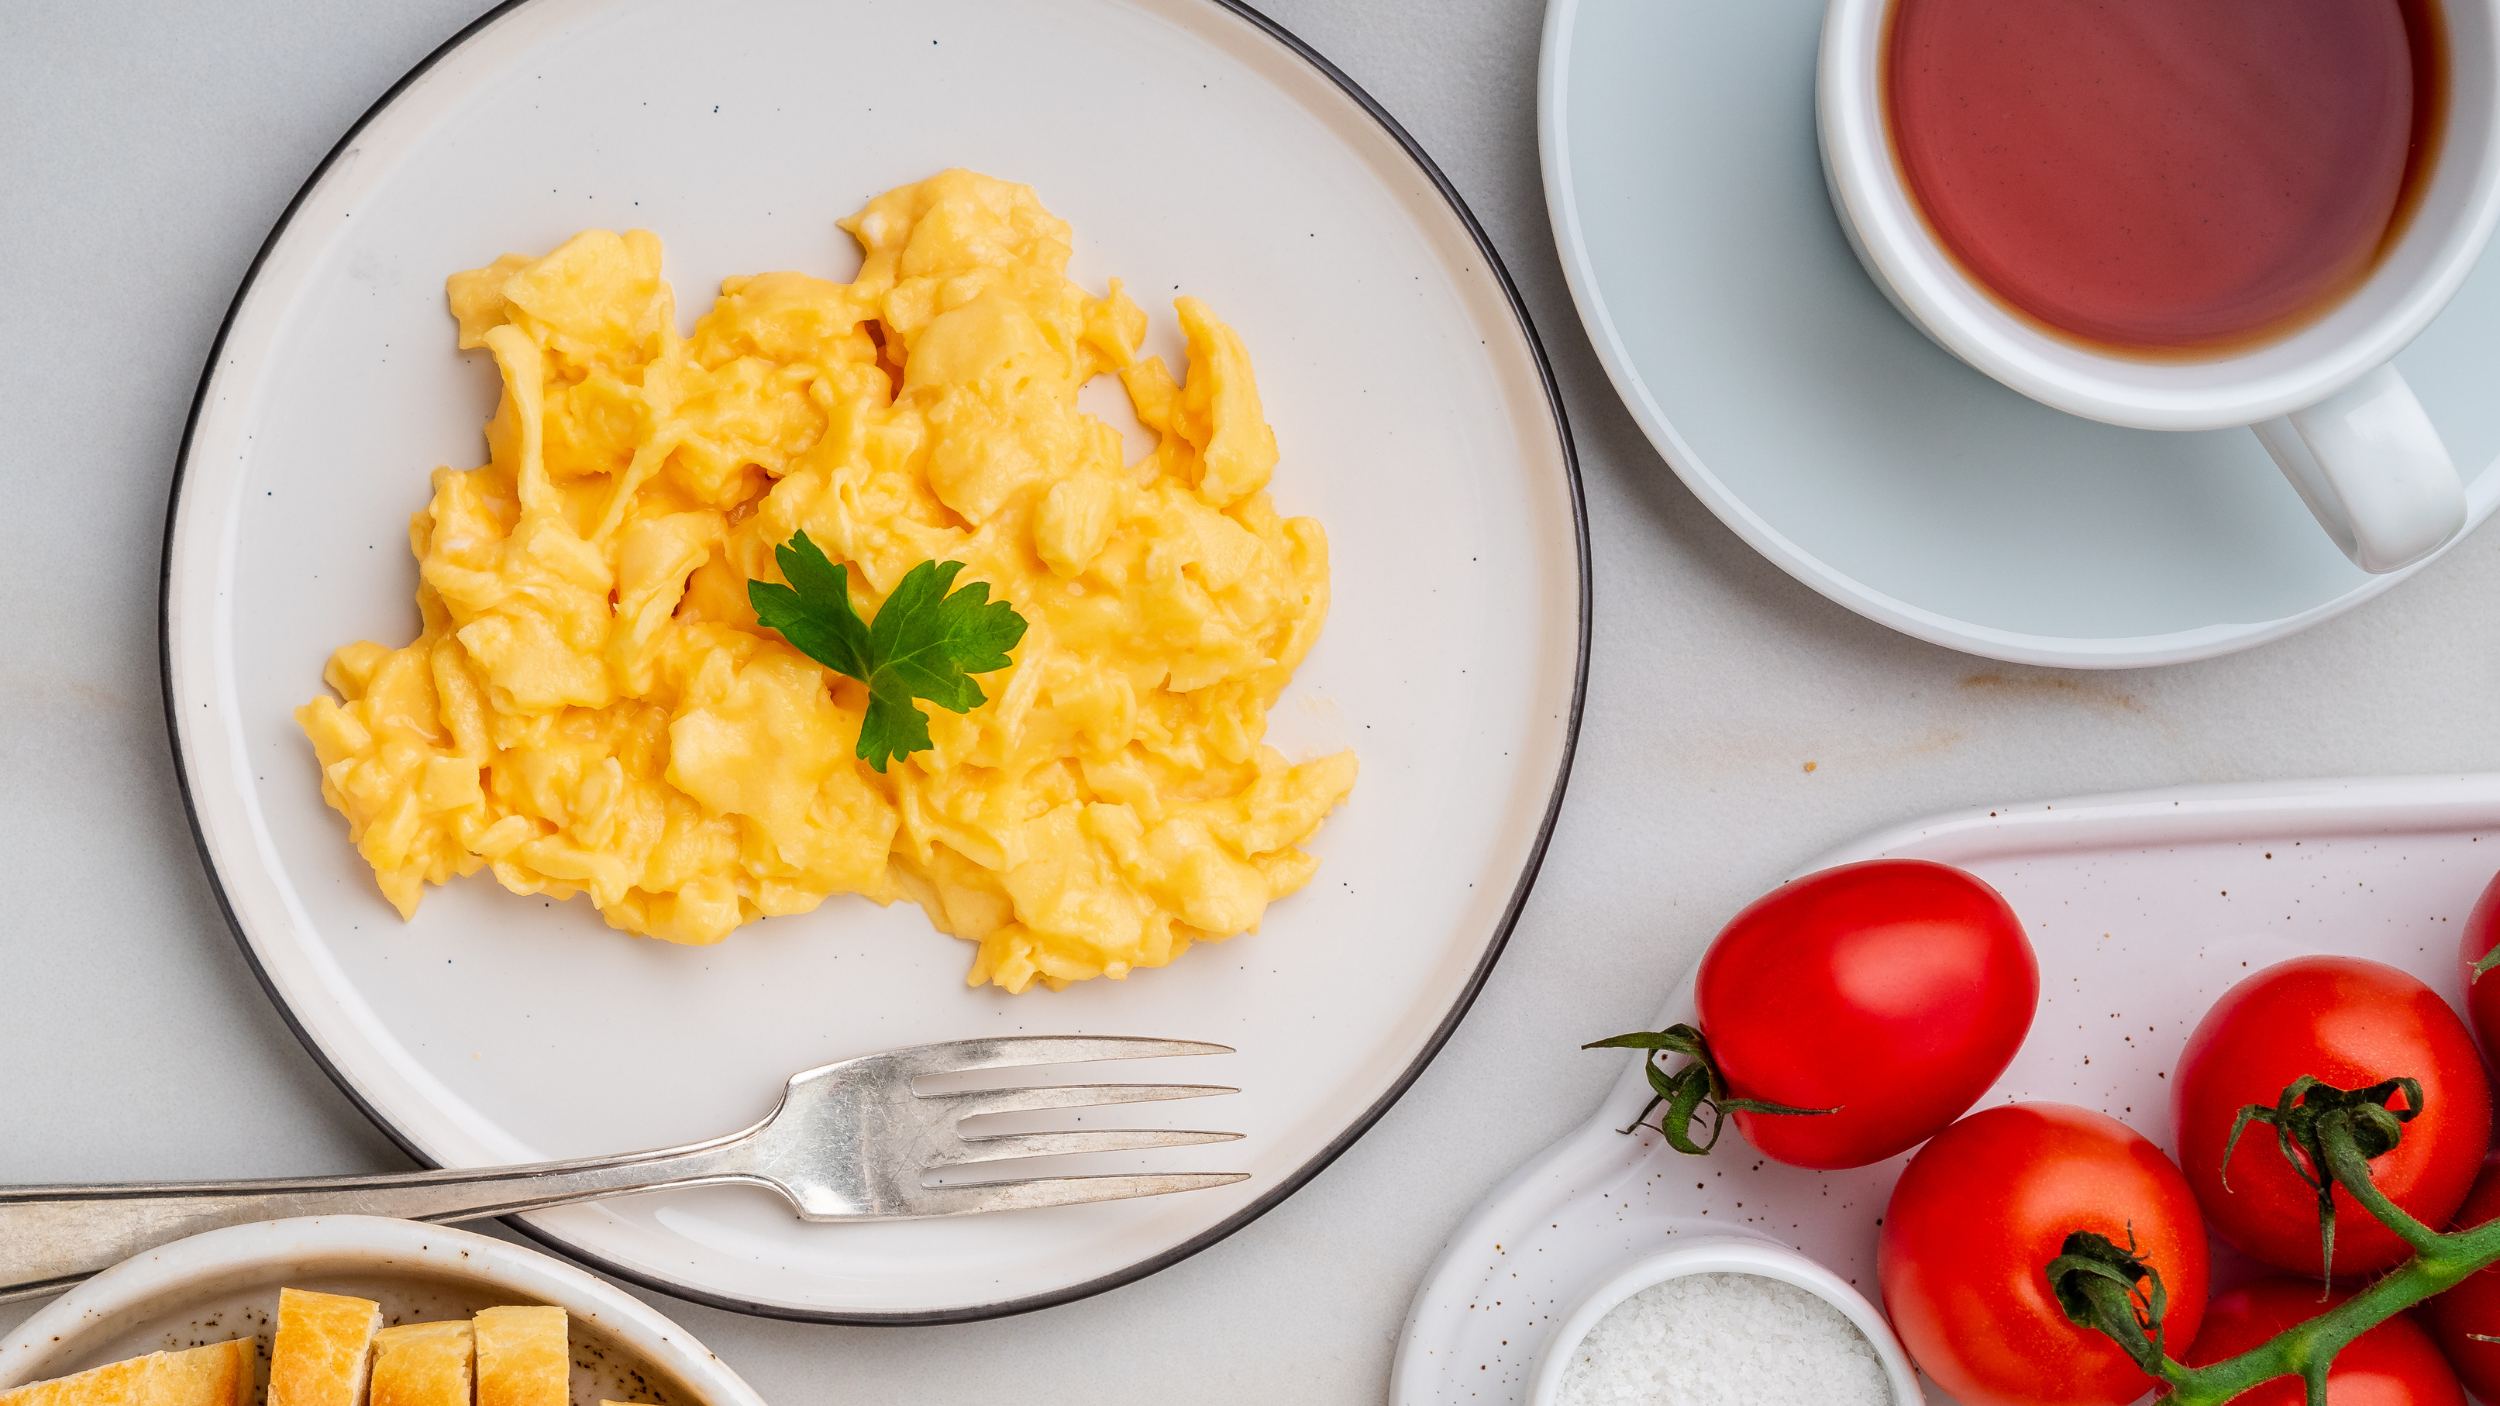 Aerial view of breakfast with scrambled eggs